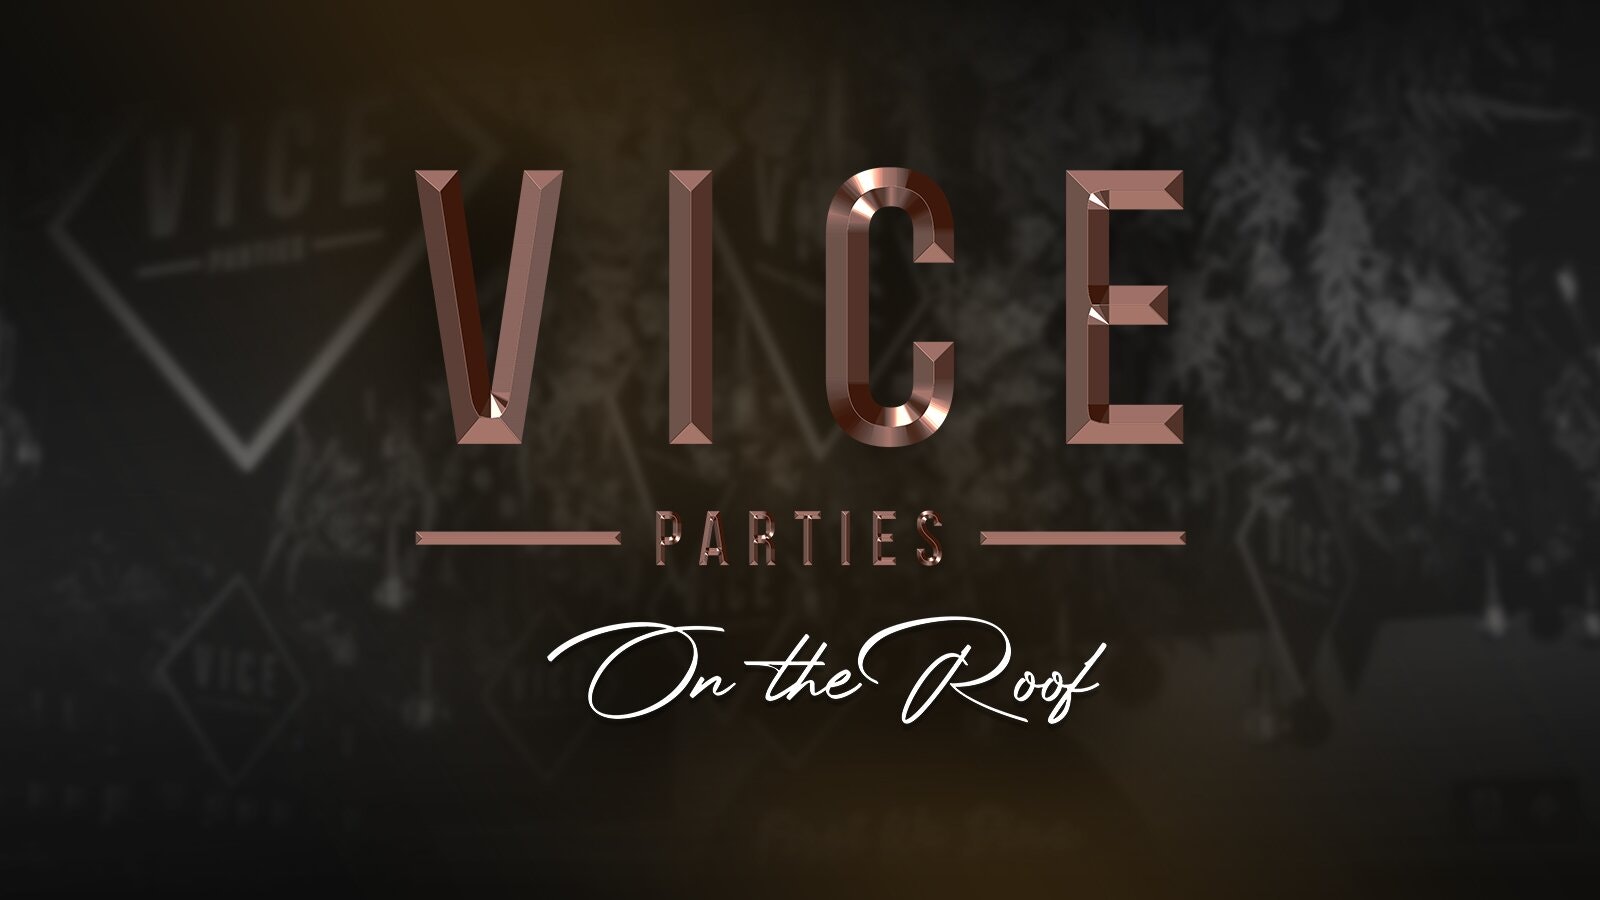 Vice Parties On The Roof